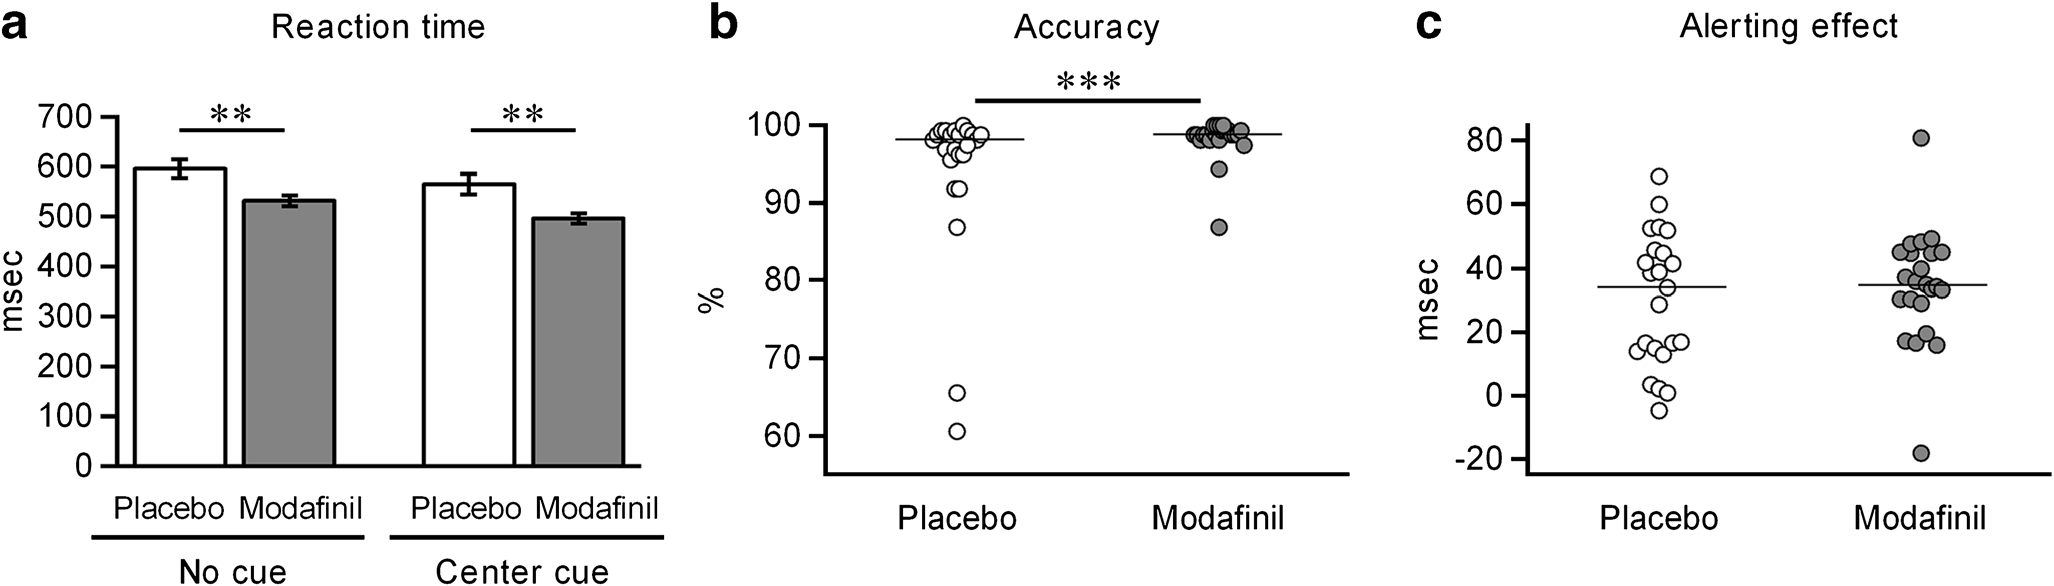 Modafinil Enhances Attention and Alerting Performance in Healthy Volunteers